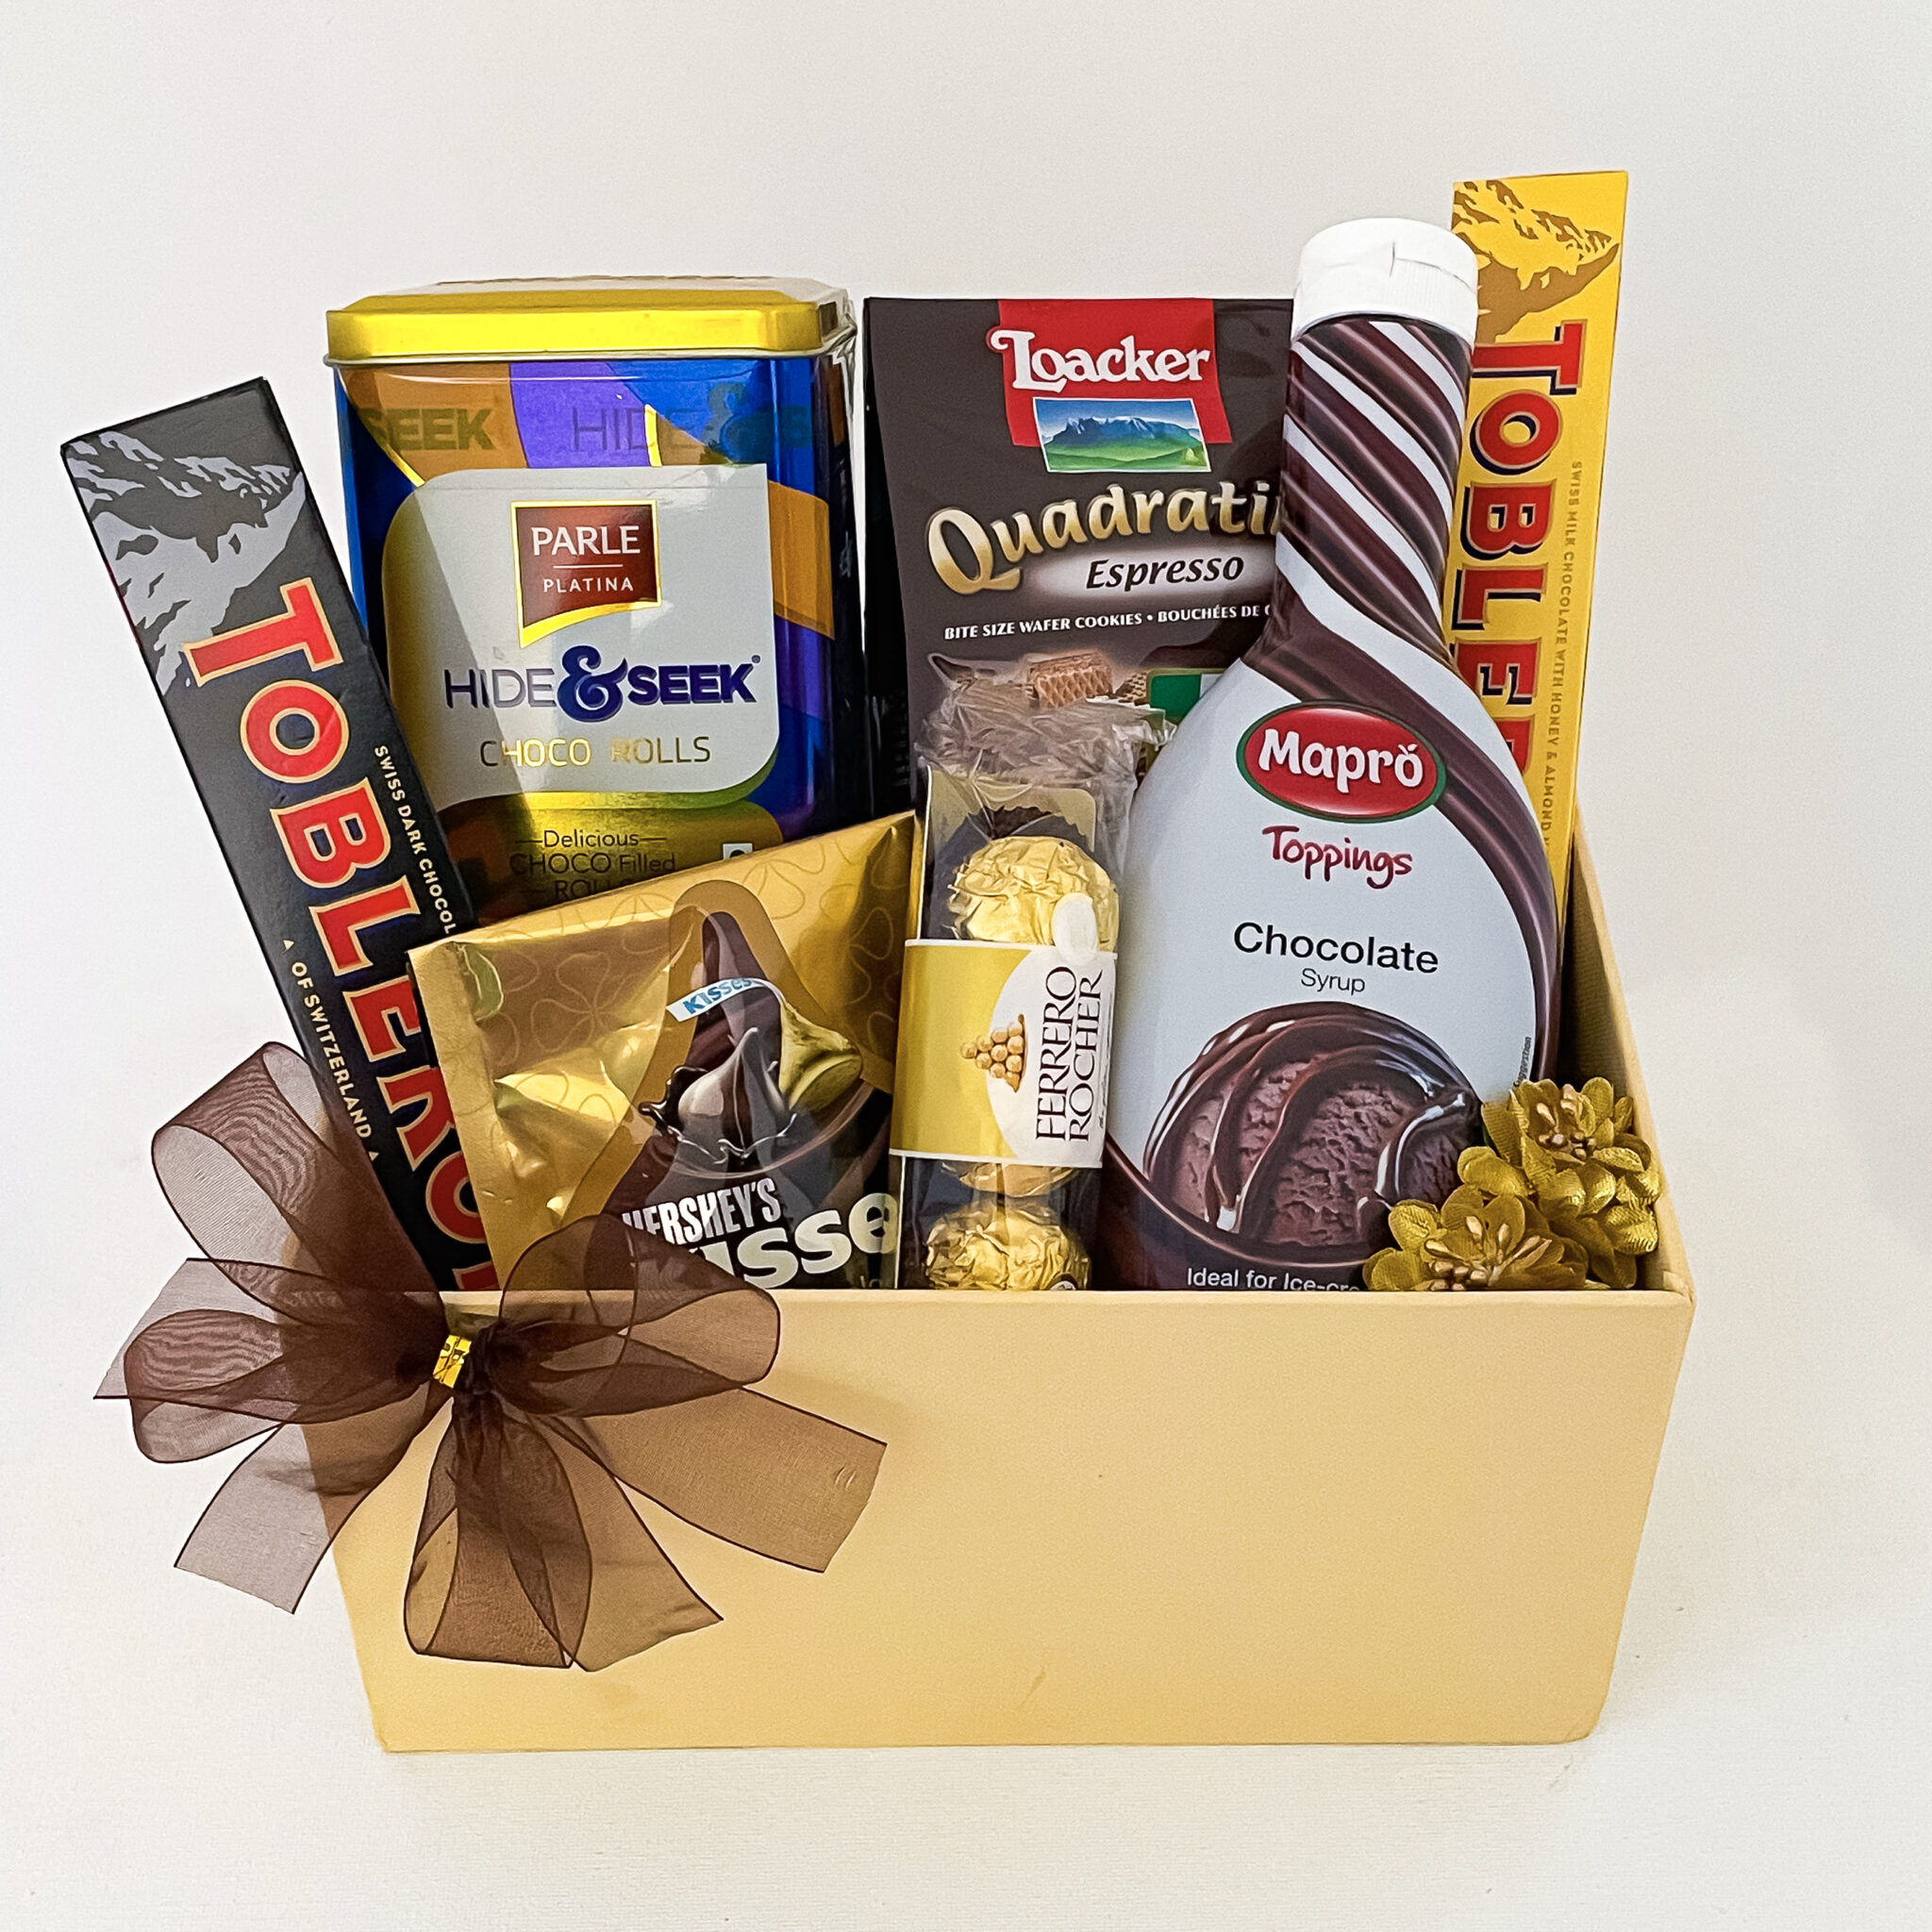 Energetic Party Gift Hampers With Flavorful Snack, Drinks And More ...